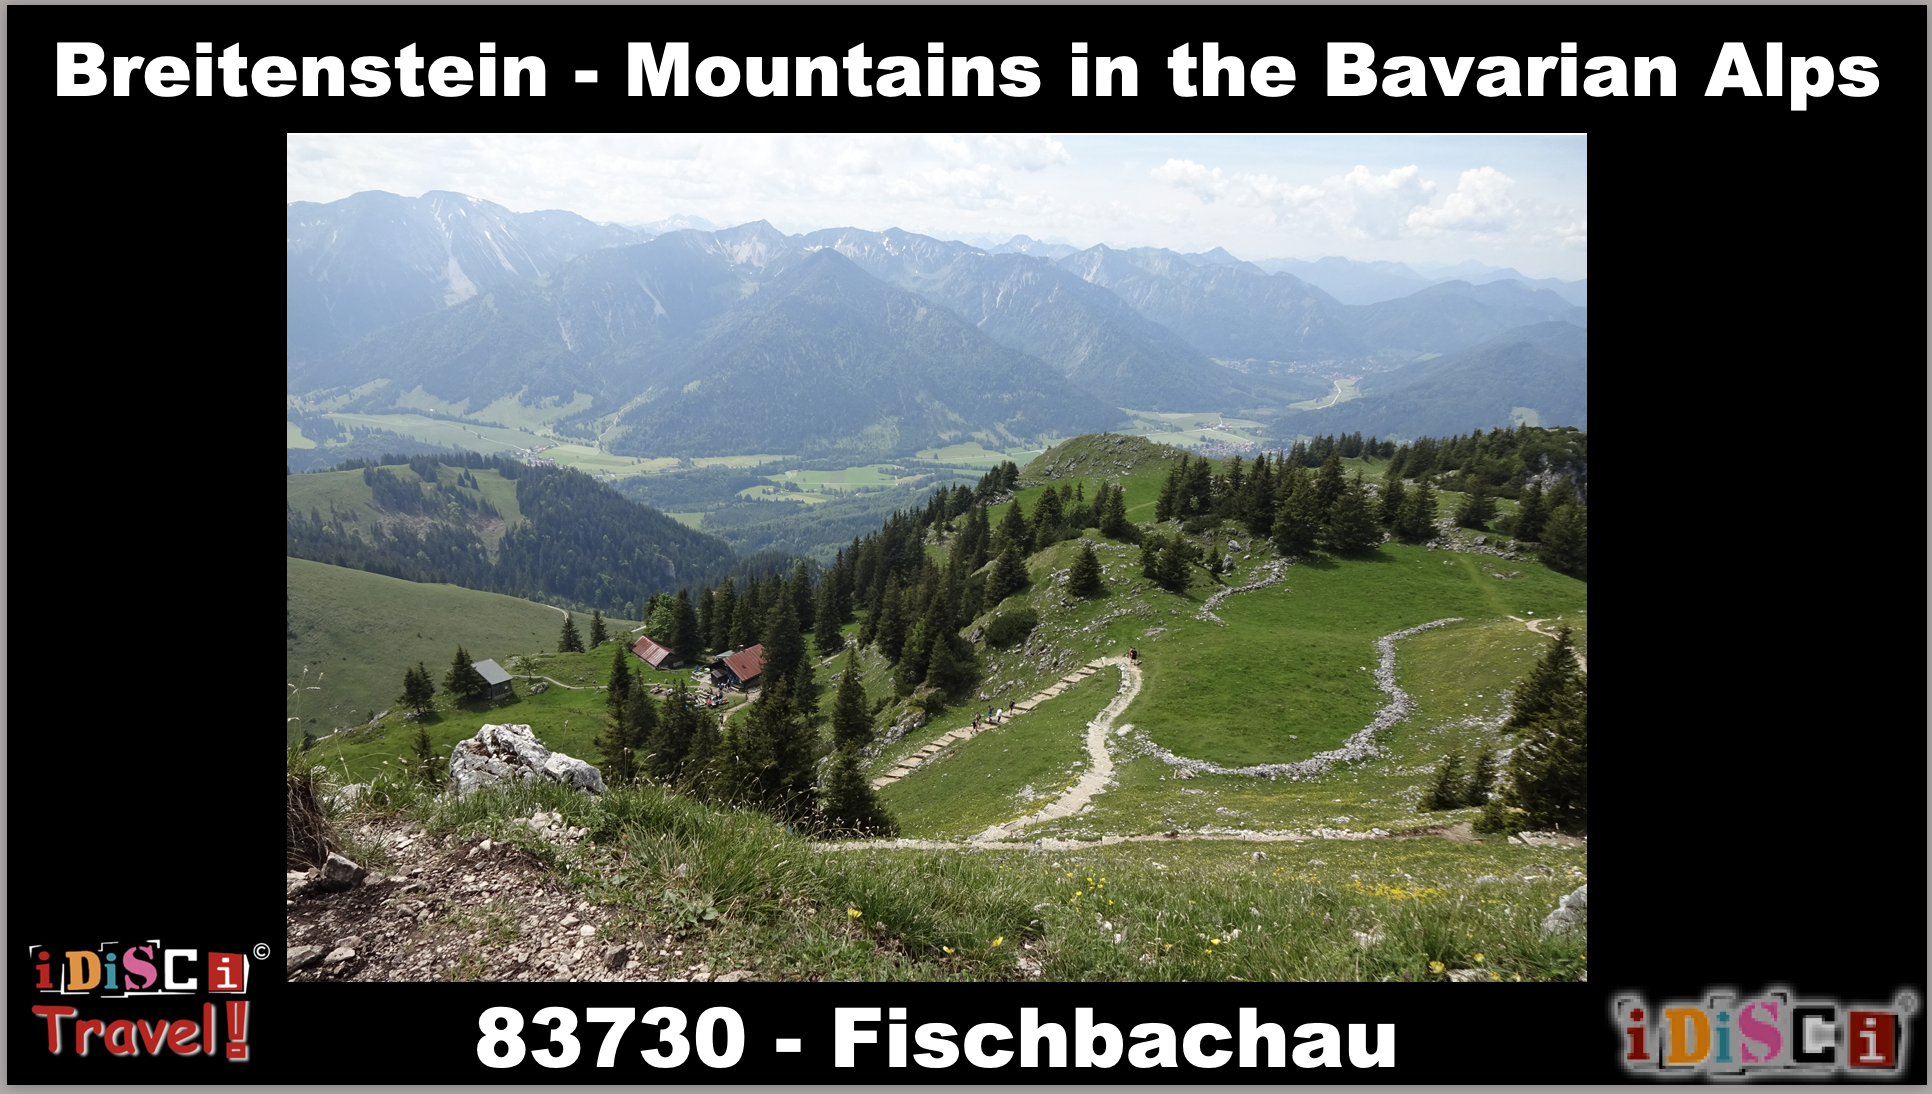 Breitenstein Mountains in the Bavarian Alps, Hiking, Fischbachau, Things to do close to Munich, Breitenstein, Bayern, Bavaria, Bavarian Alps, Rosenheim, Schliersee, Spitzingsee, Bergtour, Wandertour